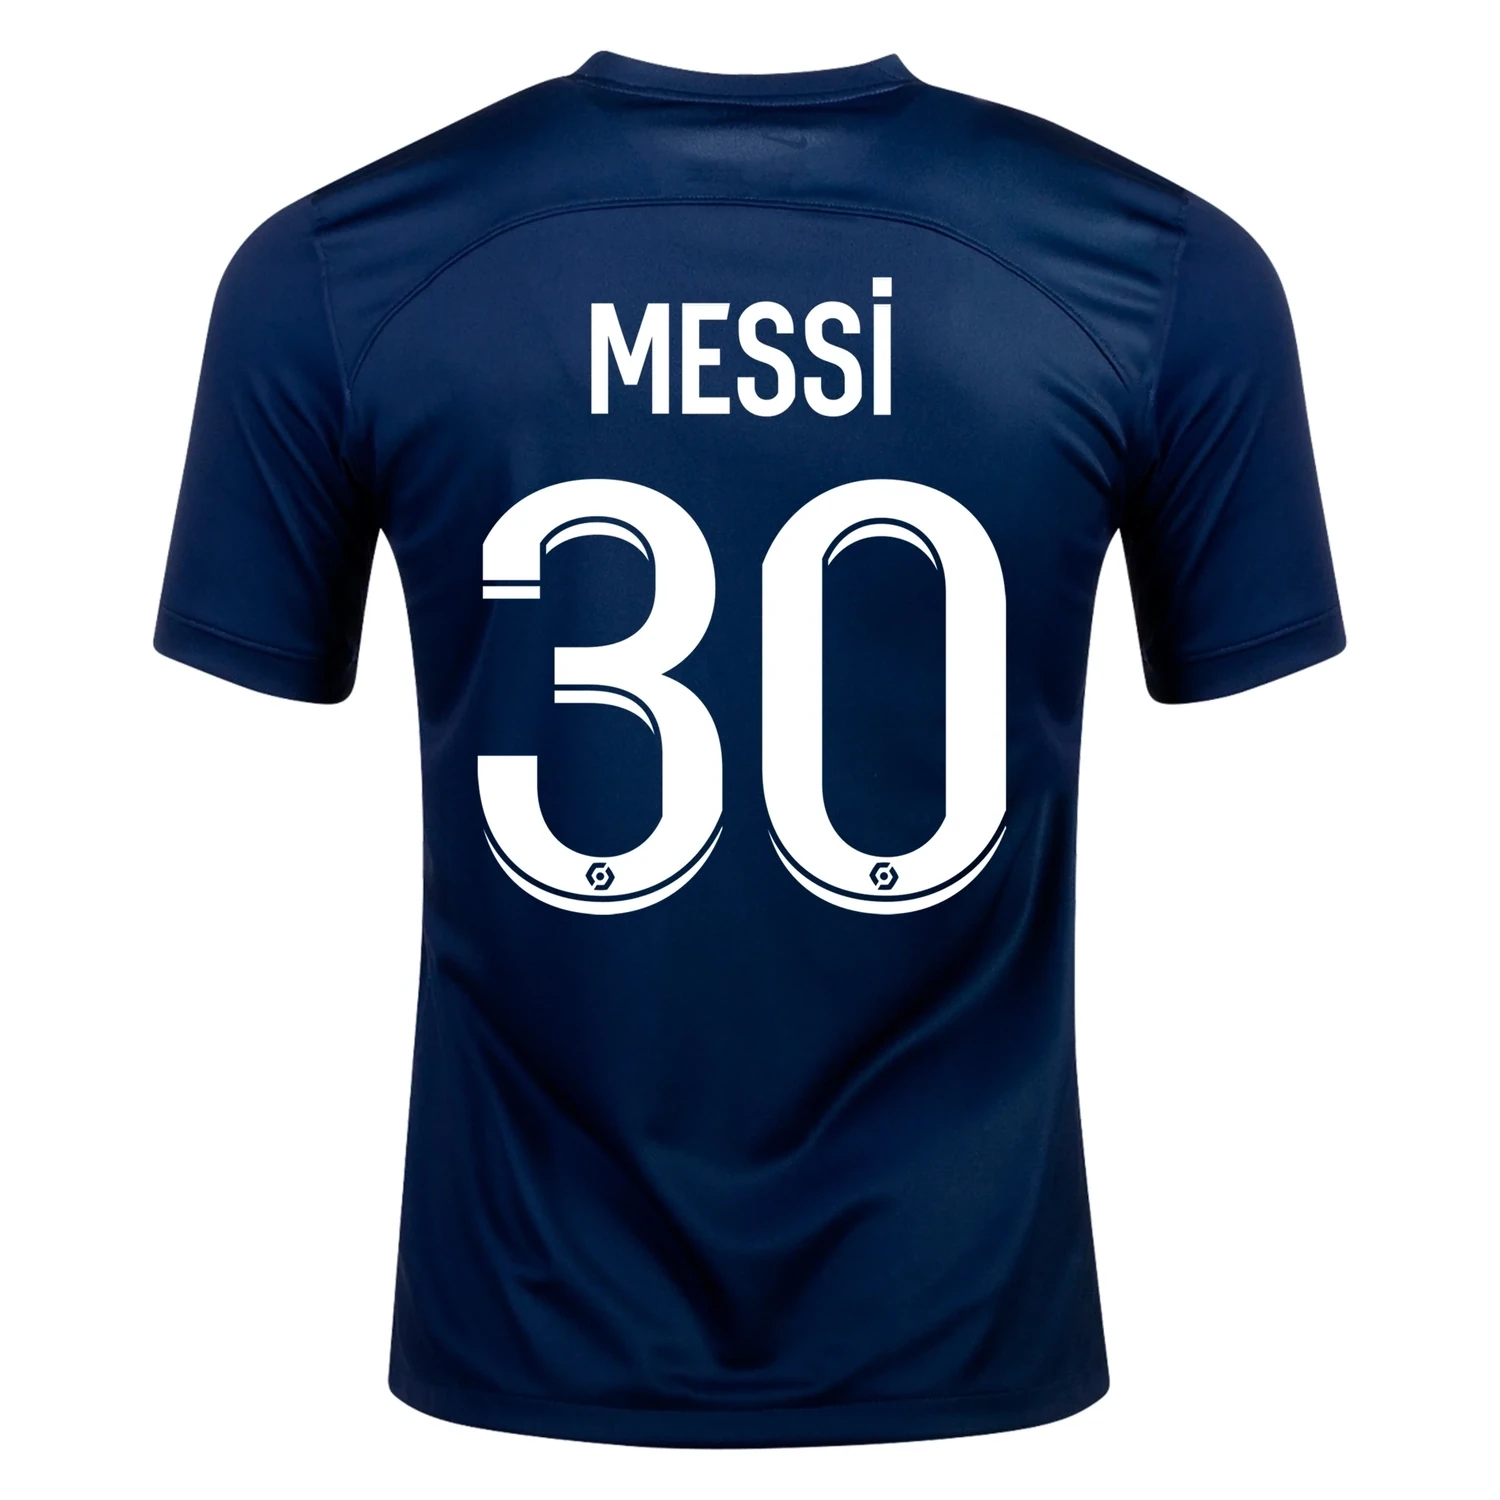 PSG Home Soccer Jersey 22-23 MESSI 30